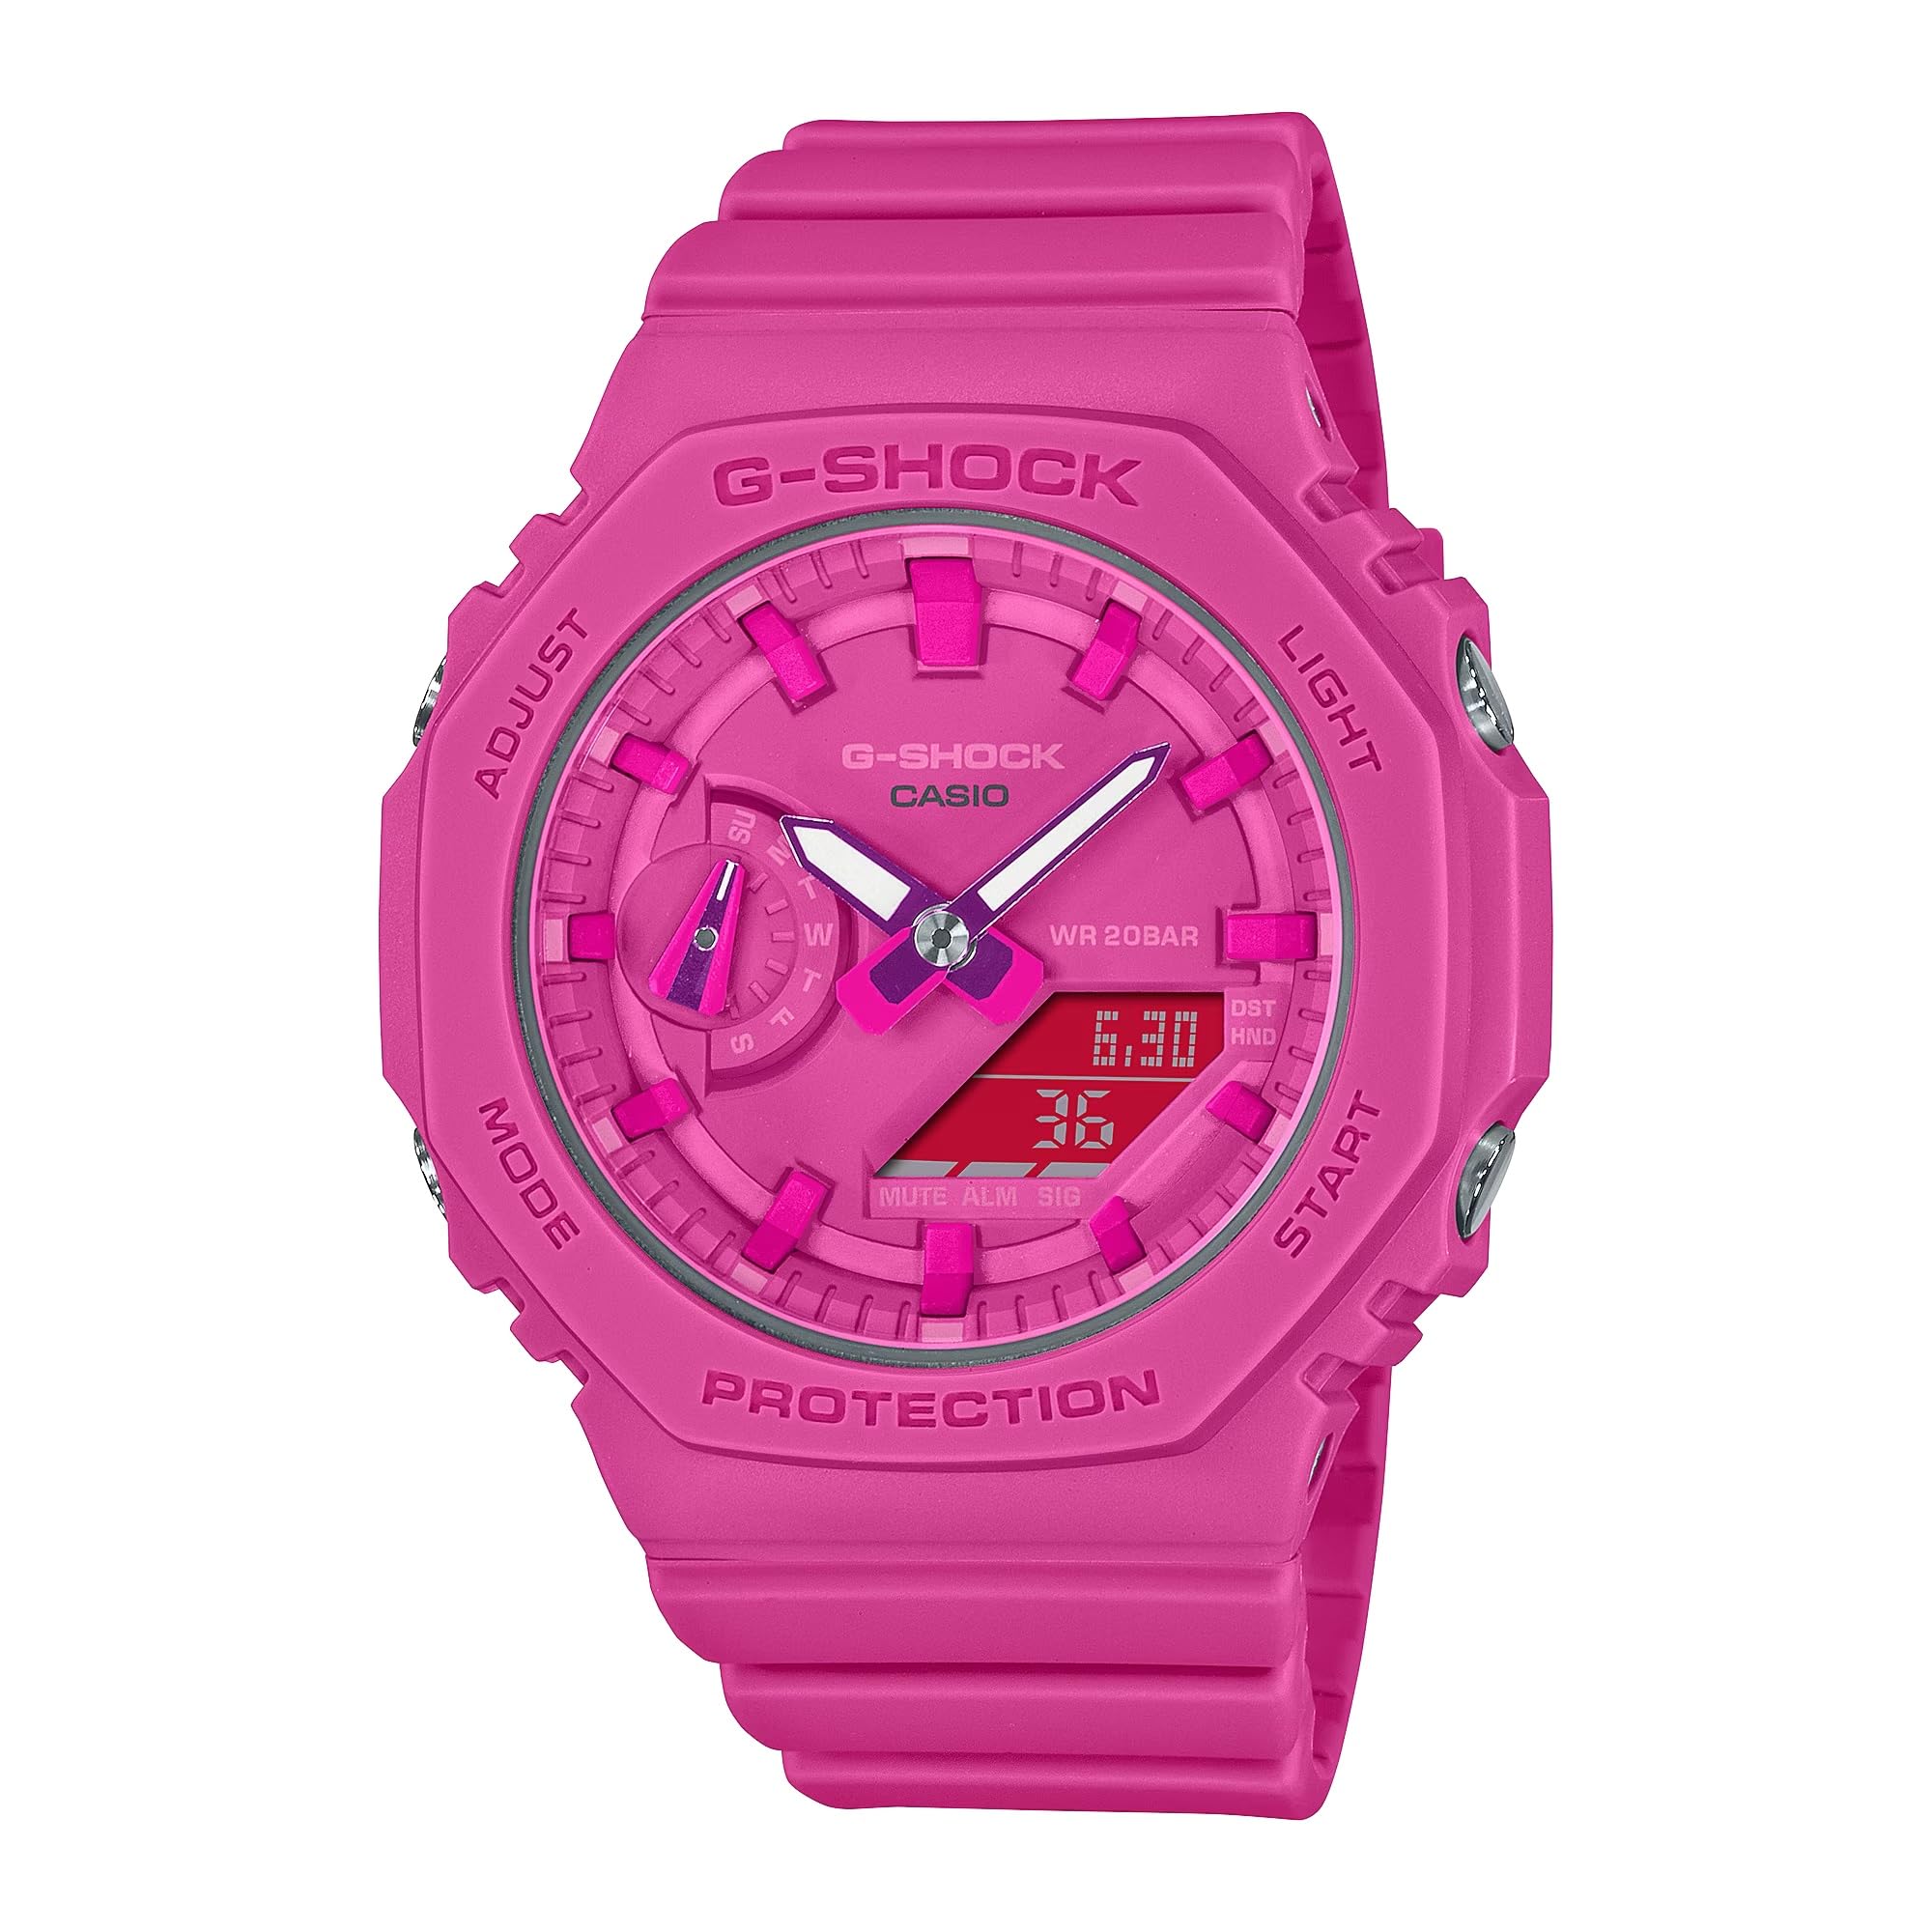 G-Shock Casio Breast Cancer Foundation Pink Womens Watch GMAS2100P-4A